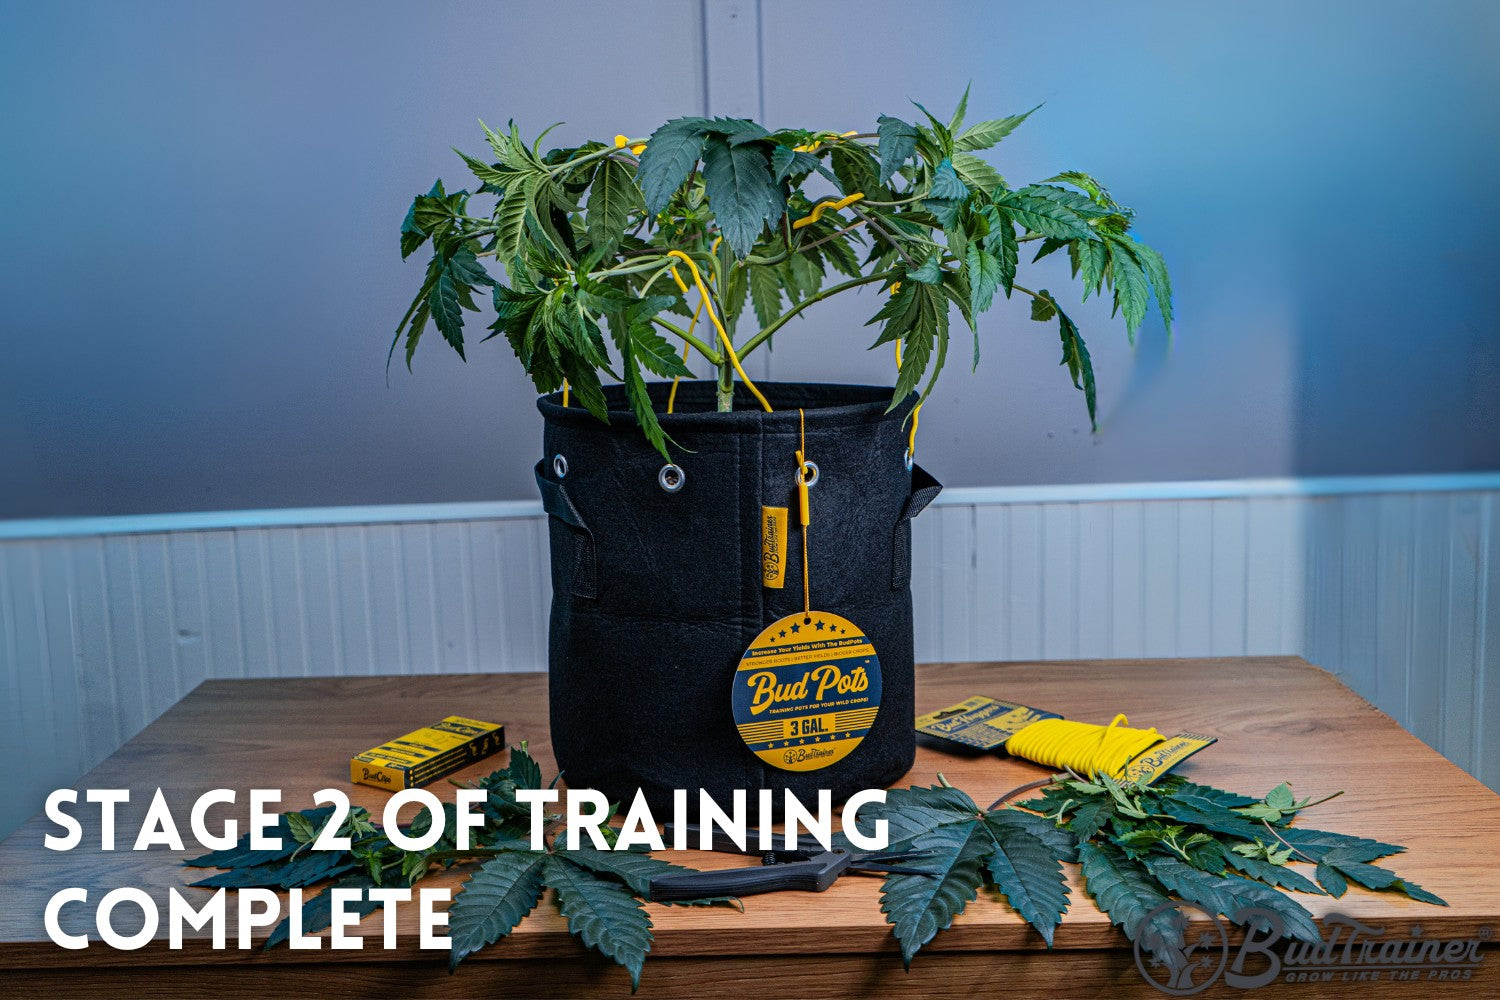 A well-trained cannabis plant sits in a black fabric pot with yellow training clips attached to its branches. The pot is labeled “Bud Pots 3 GAL,” and the scene is set on a wooden table with tools and packaging visible. The background features a blue gradient wall. The text “Stage 2 of Training Complete” indicates the progression of the plant training process.